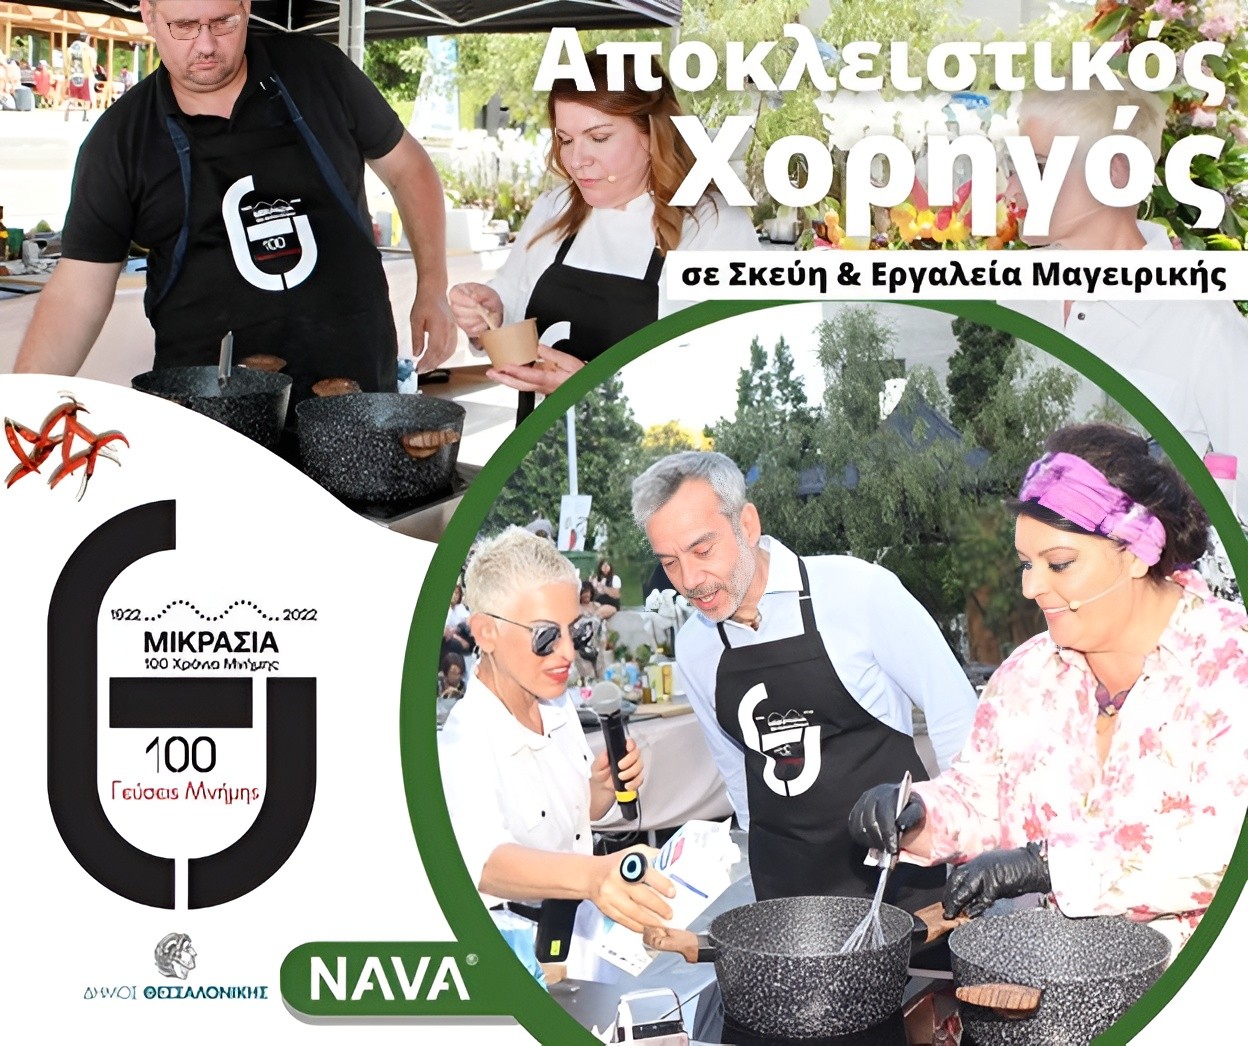 NAVA is the exclusive sponsor of the event 'Tastes of Memory' for the 100 years since the Asia Minor disaster of the Municipality of Thessaloniki